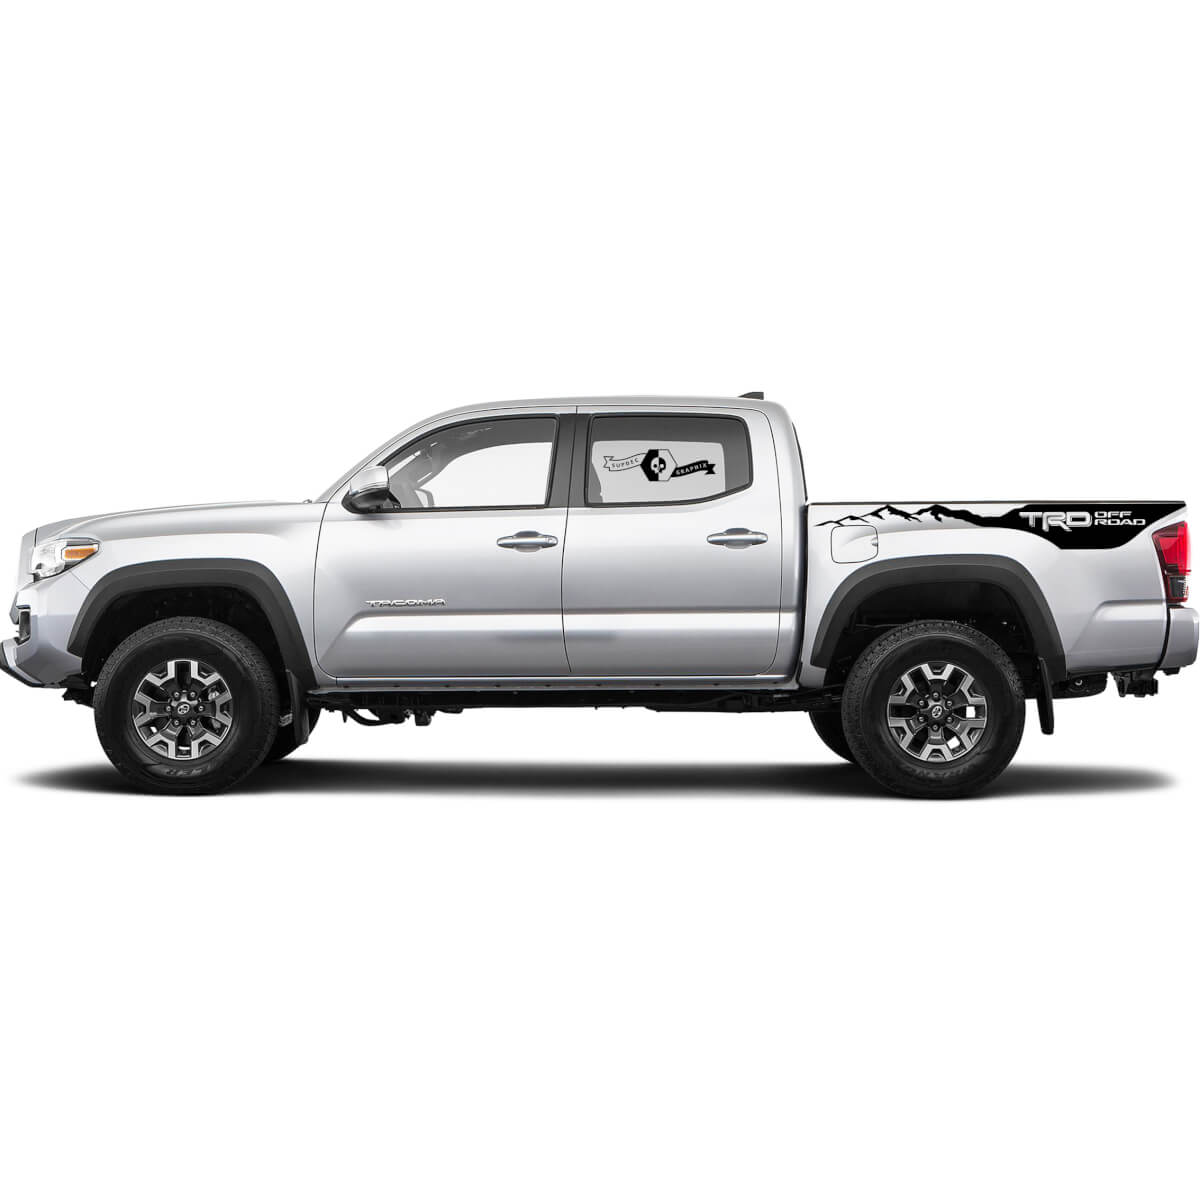 2X Tacoma Toyota TRD Off Road Truck Bed side Decals Vinyl Stickers Mountains